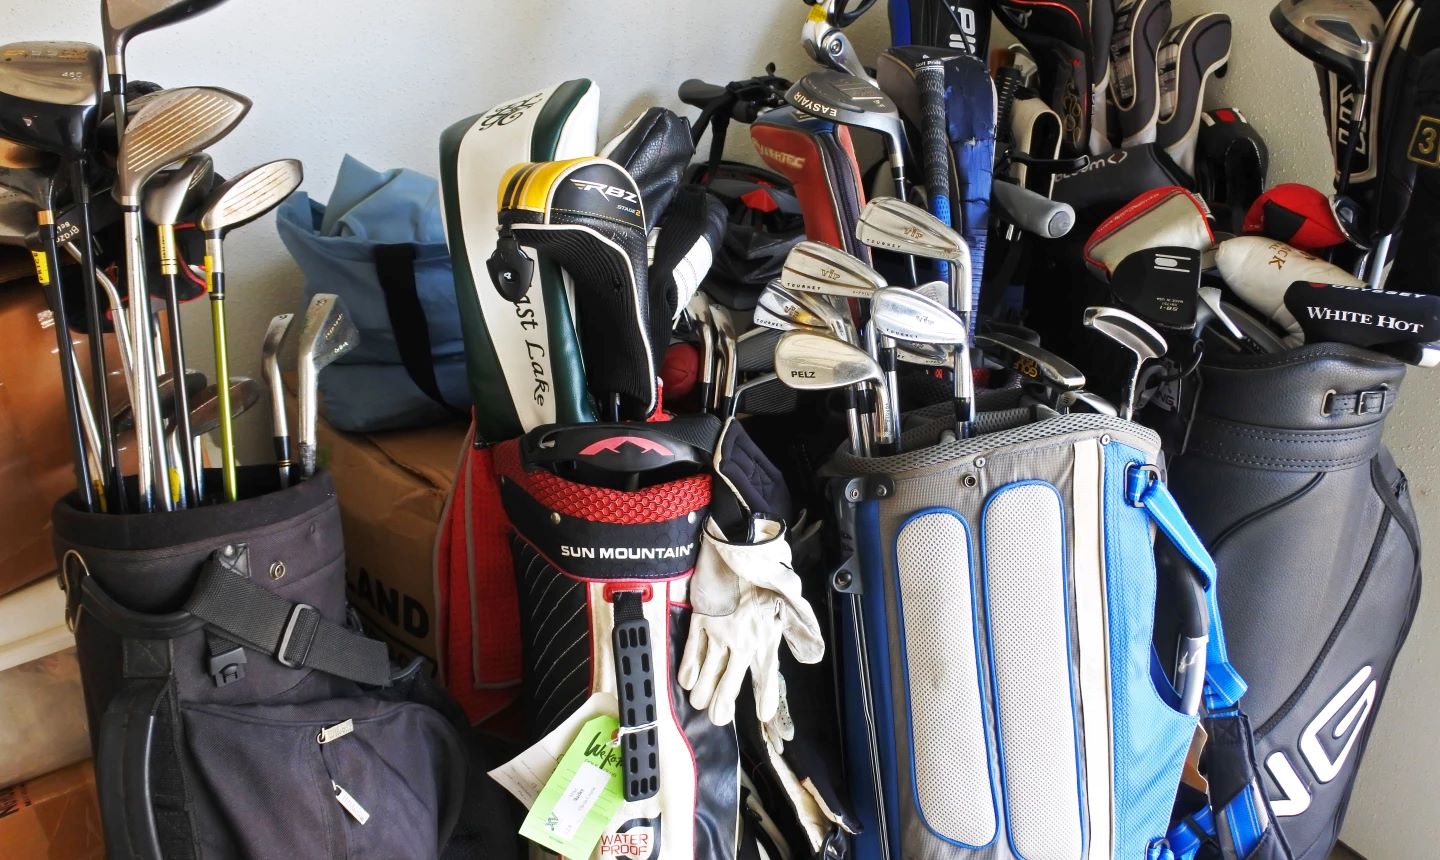 How To Store Golf Clubs In Garage